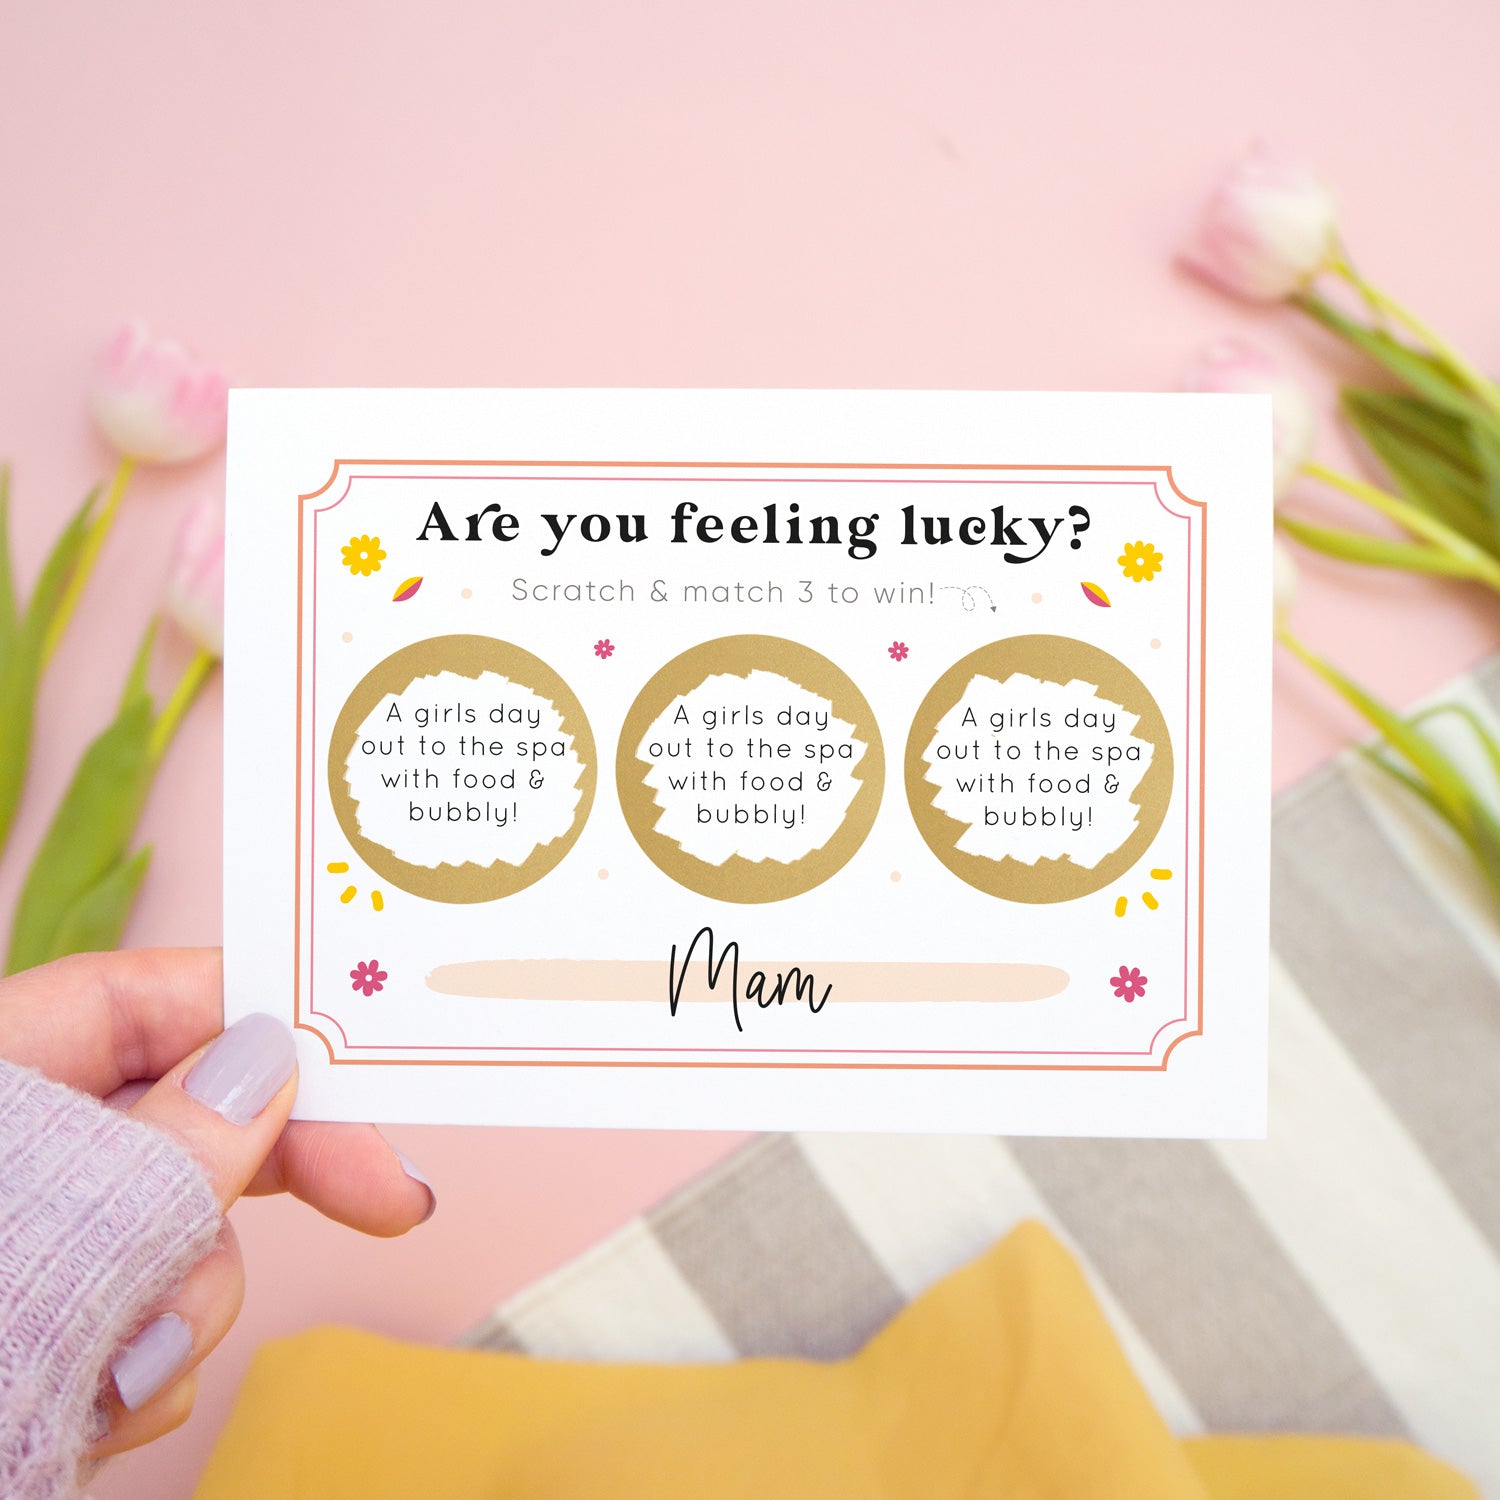 A personalised floral match 3 to win style scratch card being held over a pink, grey and white background with tulips scattered around the edges. The card has had all 3 golden scratch panels scratched off to reveal the 3 matching winning messages! This card is the pink and peach version.